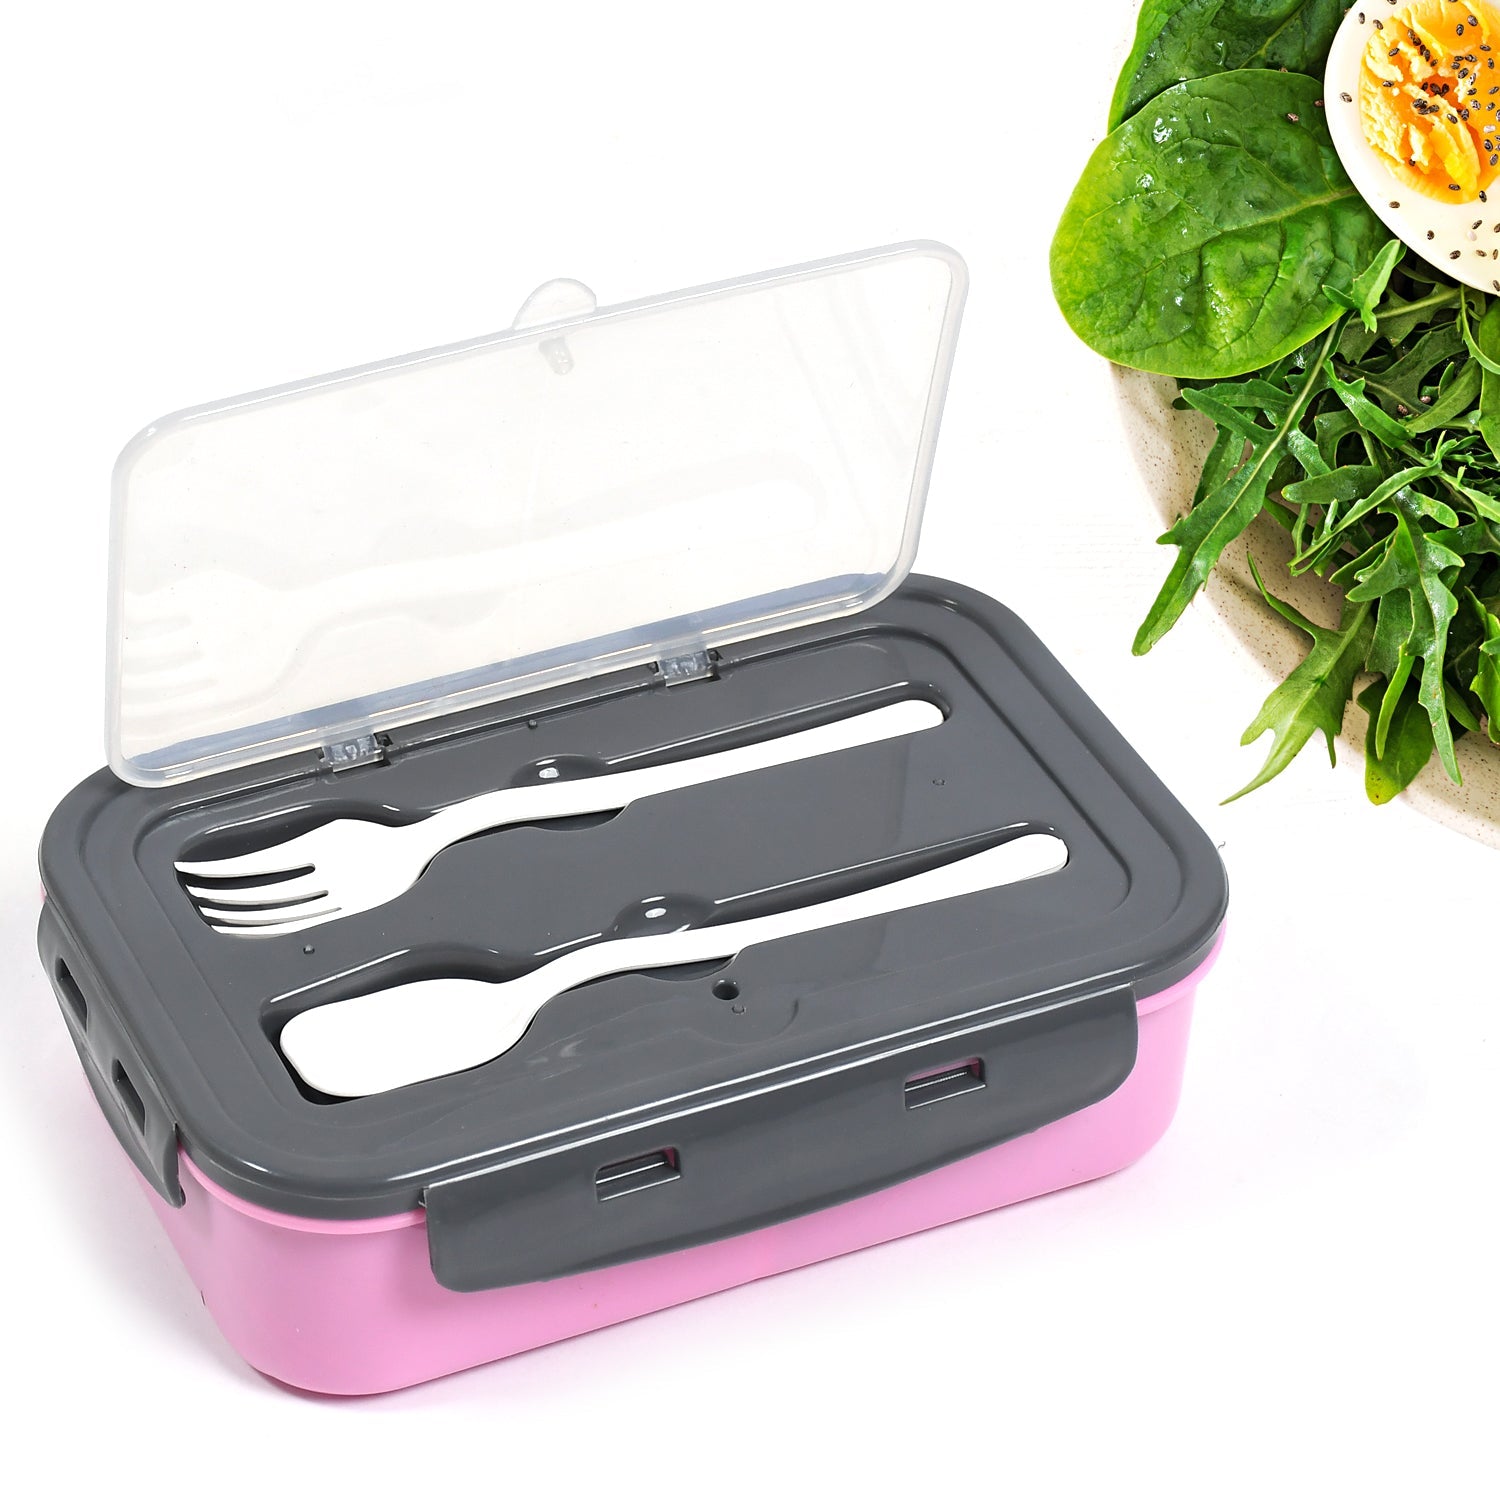 2809b LUNCH BOX 3 COMPARTMENT PLASTIC LINER LUNCH CONTAINER, PORTABLE TABLEWARE SET FOR OFFICE , SCHOOL & HOME USE DeoDap